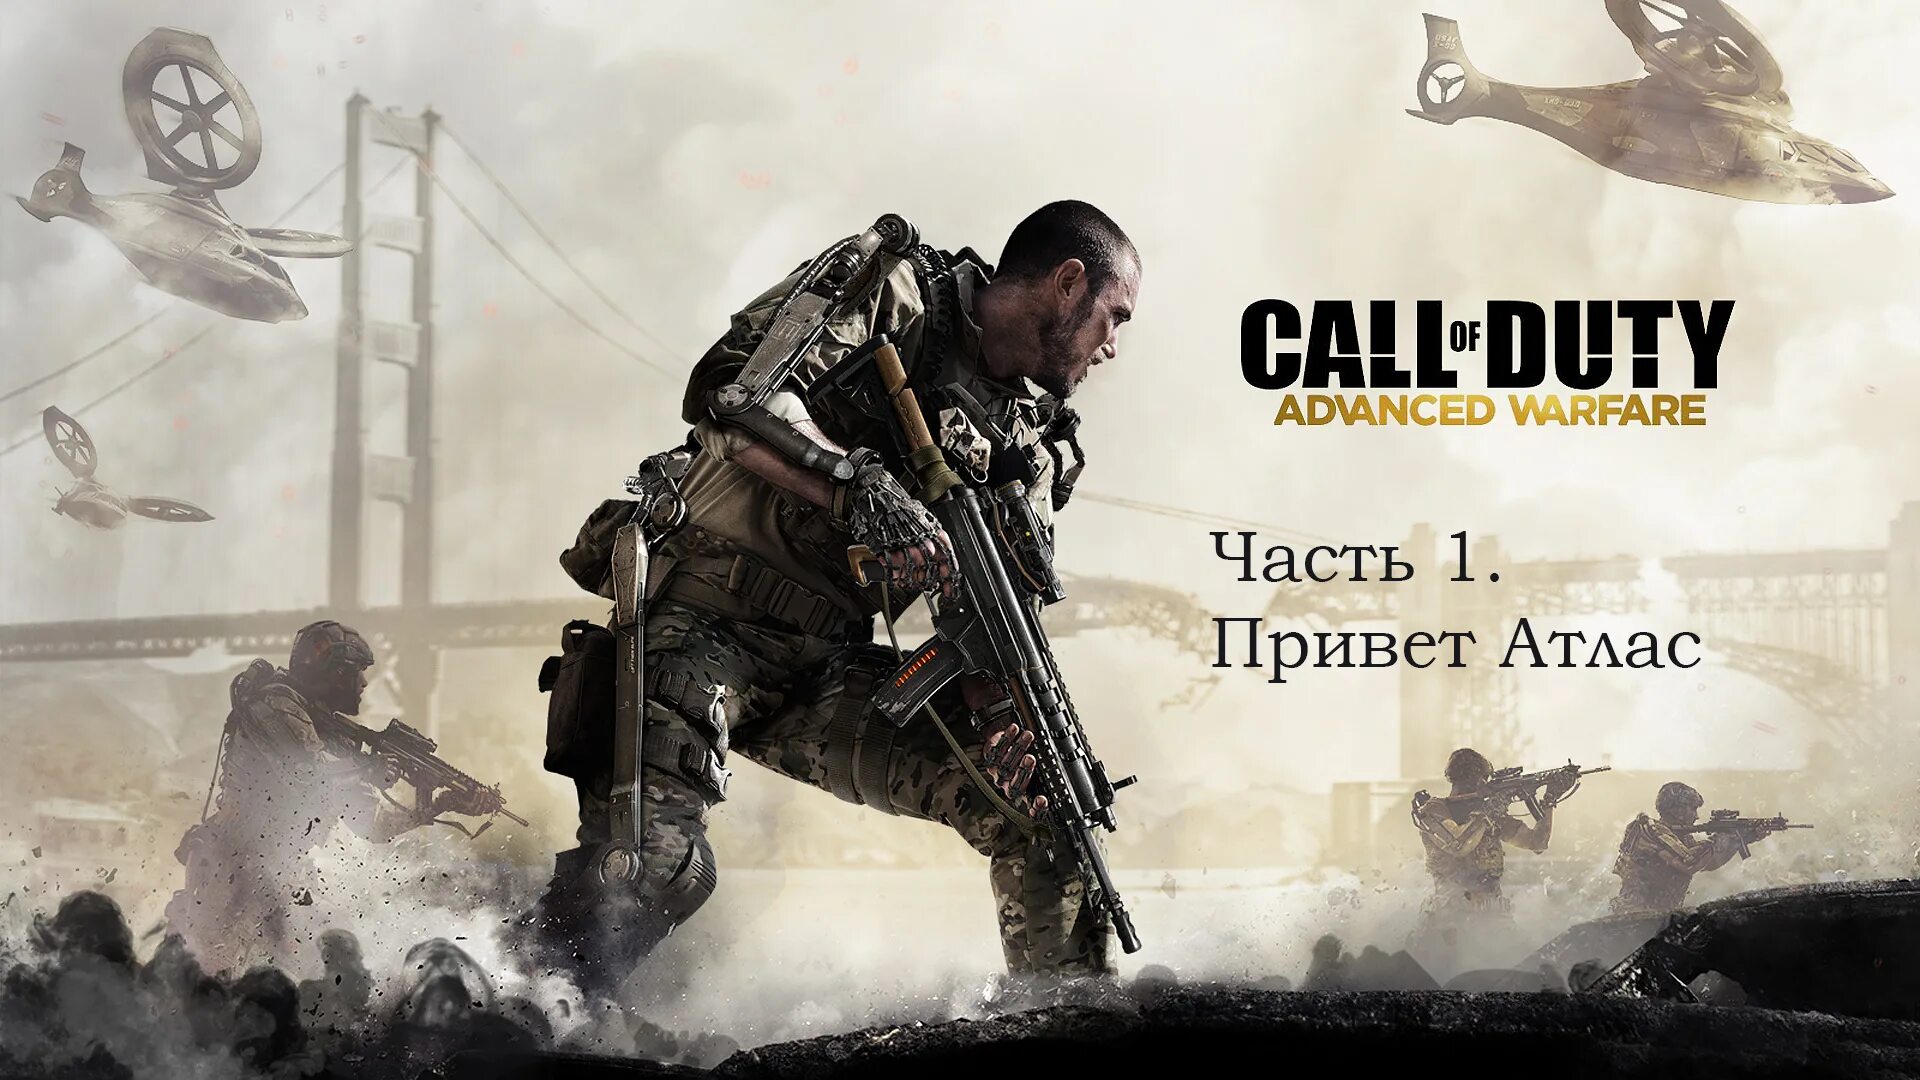 Call of duty adventure. Call of Duty Advanced Warfare Постер. Call of Duty Advanced Warfare обложка. Call of Duty 1 Постер. Call of Duty Адвансед варфаер.